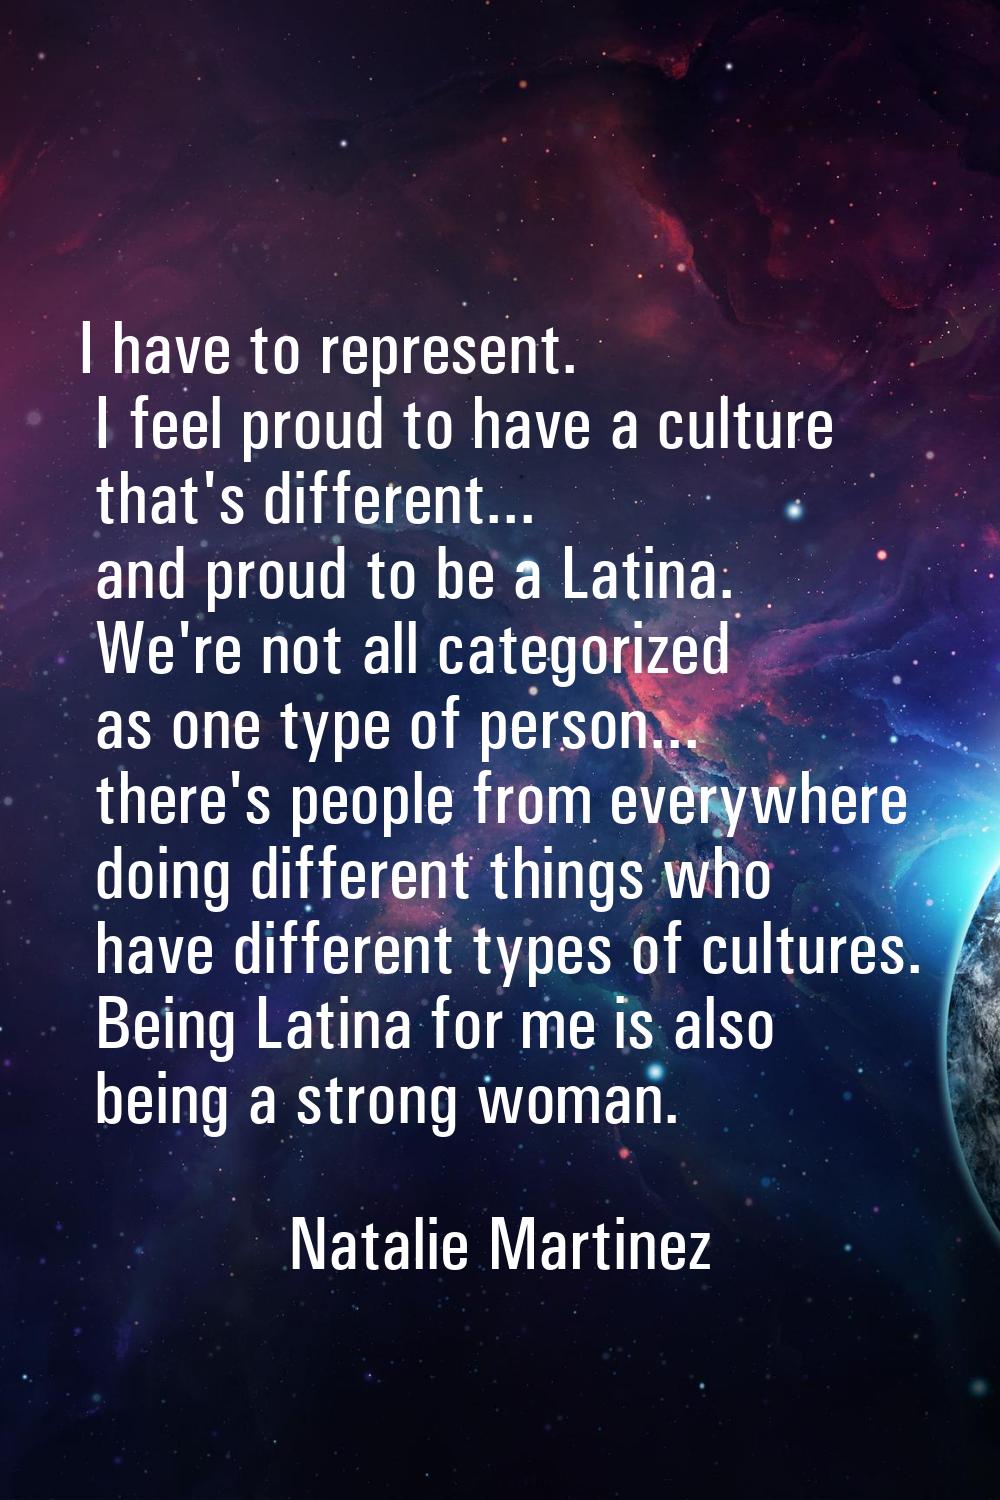 I have to represent. I feel proud to have a culture that's different... and proud to be a Latina. W